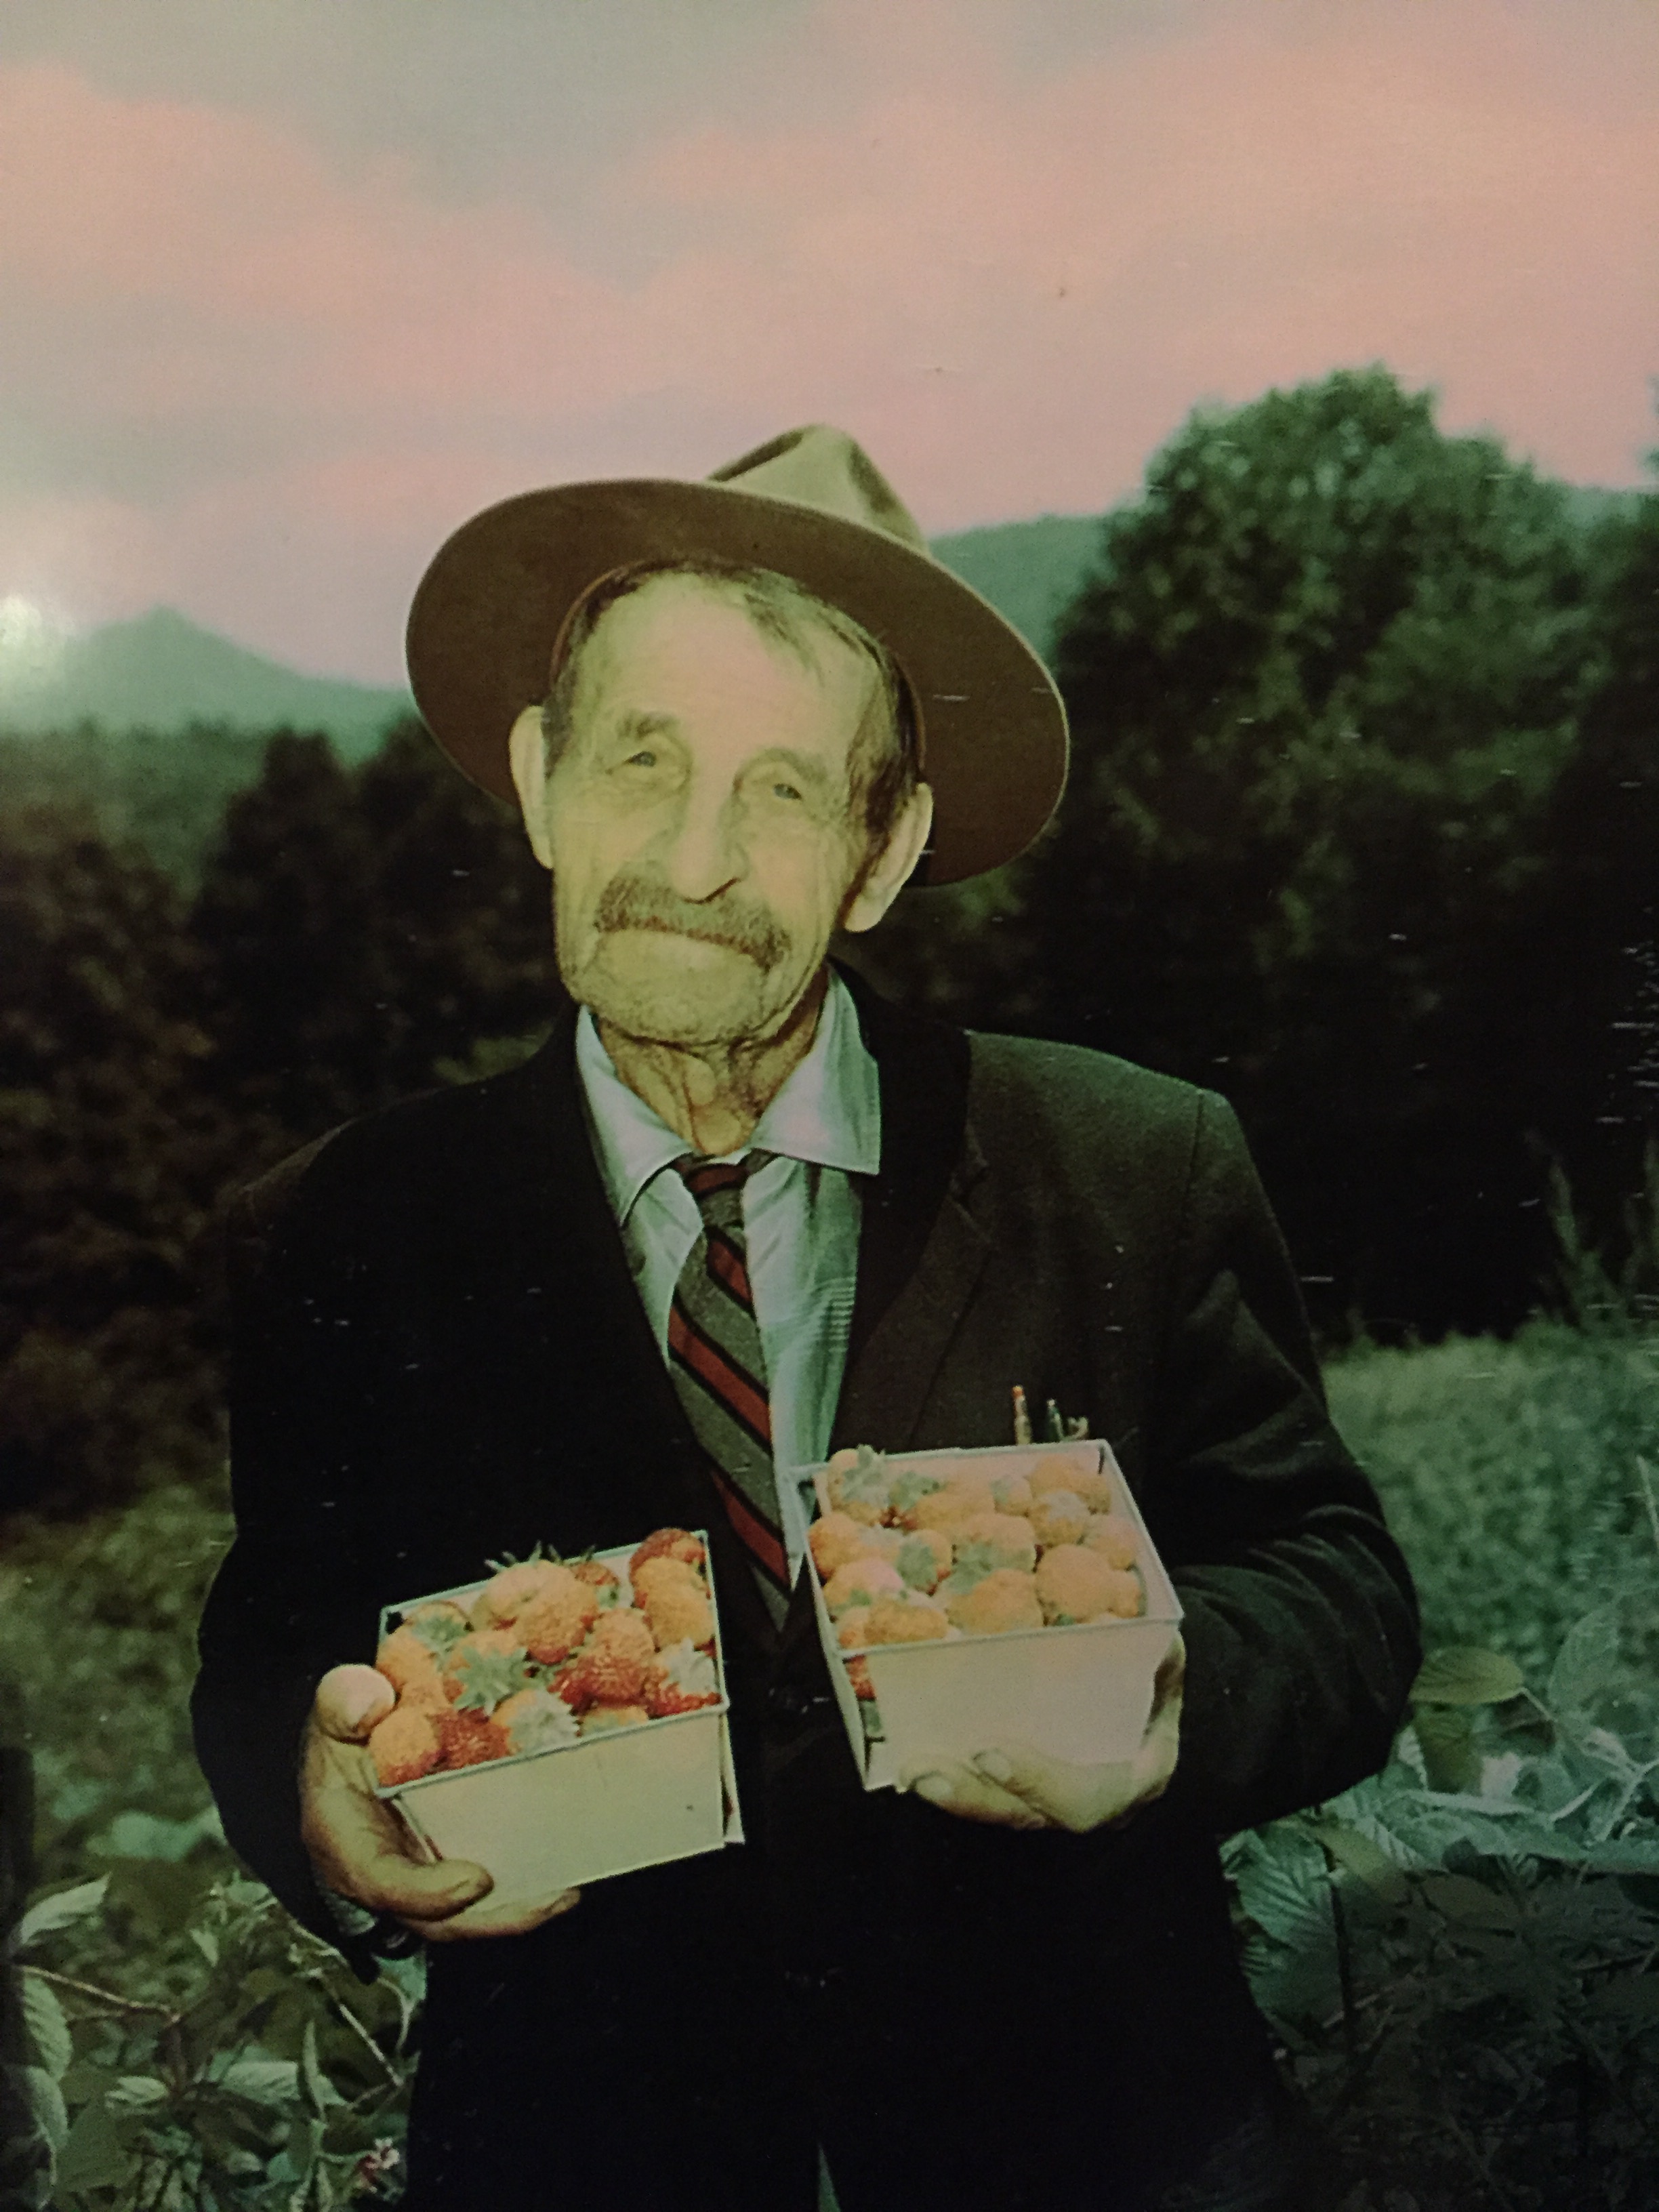 Joe Larkin Hartley with his prize-winning strawberries. Photo by Hugh Morton, found in the Hugh Morton Photographs and Films #P0081, copyright 1950s, North Carolina Collection, University of North Carolina at Chapel Hill Library.